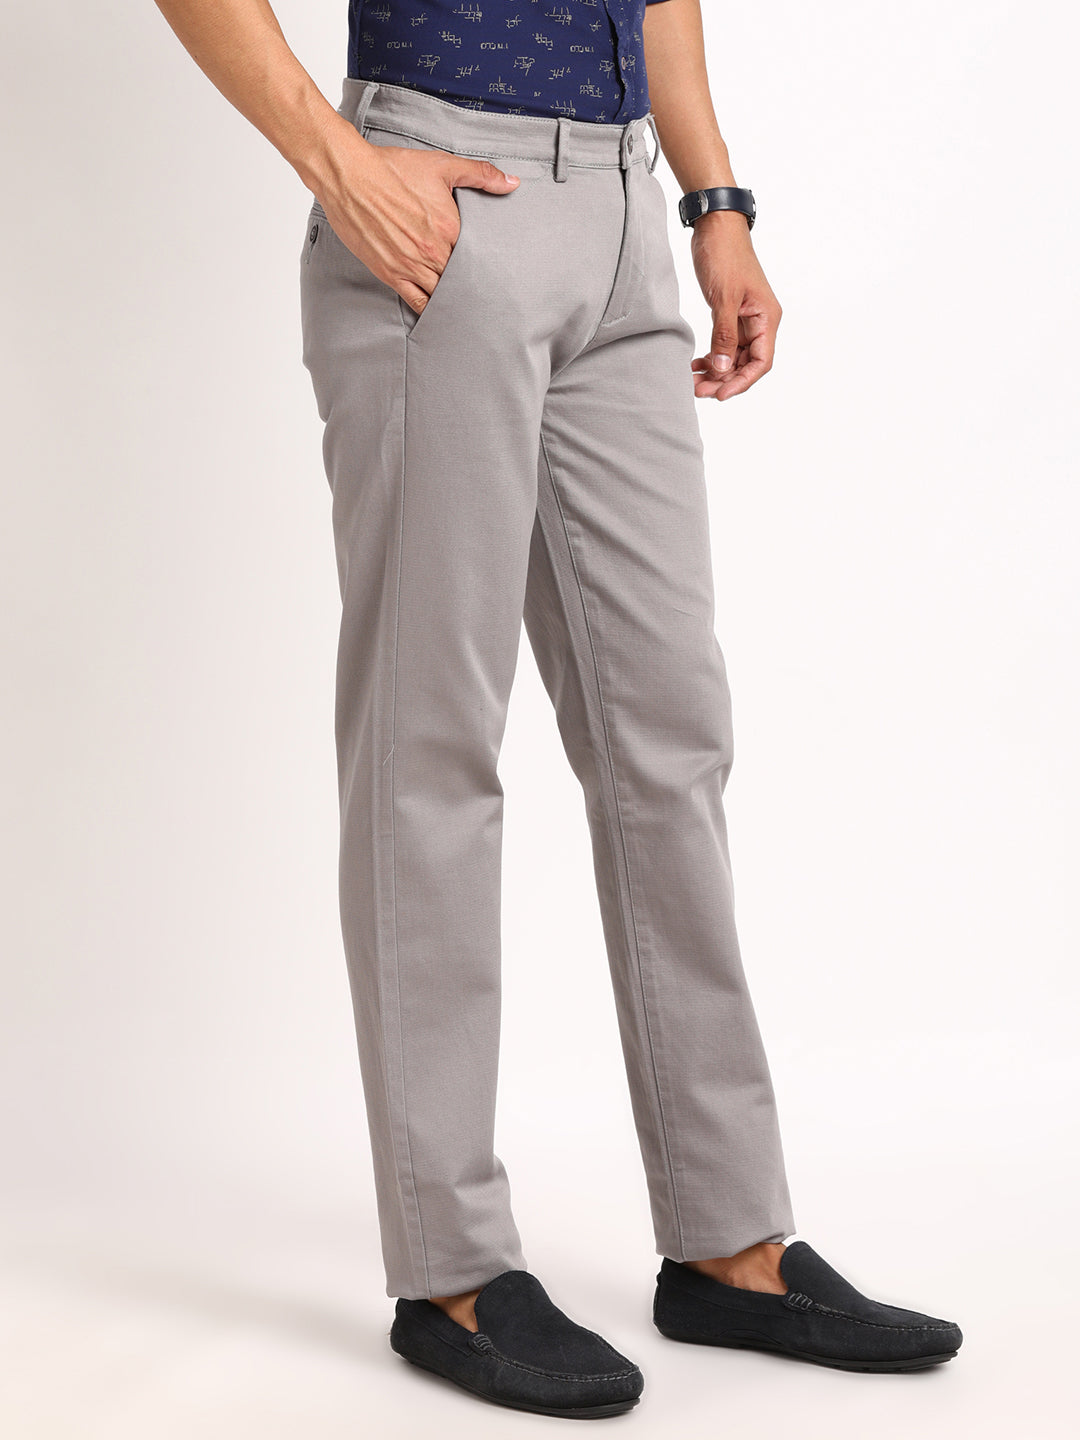 Cotton Stretch Dark Grey Dobby Ultra Slim Fit Flat Front Casual Trouser